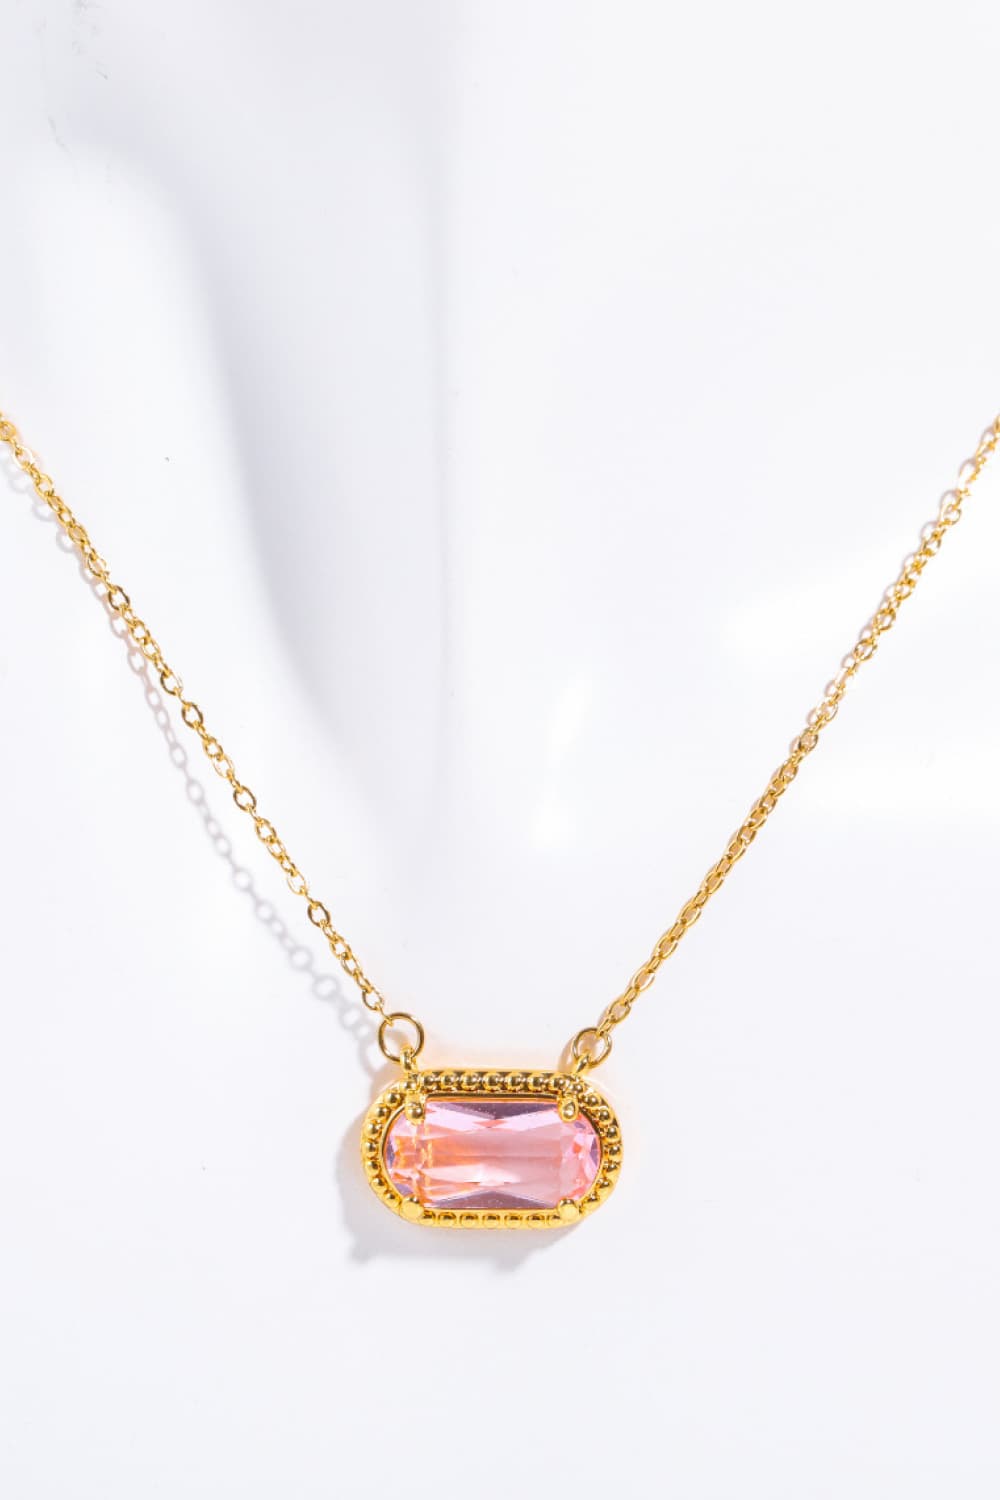 Trendsi Cupid Beauty Supplies Carnation Pink / One Size Women Necklace Copper 14K Gold Pleated Pendant Necklace